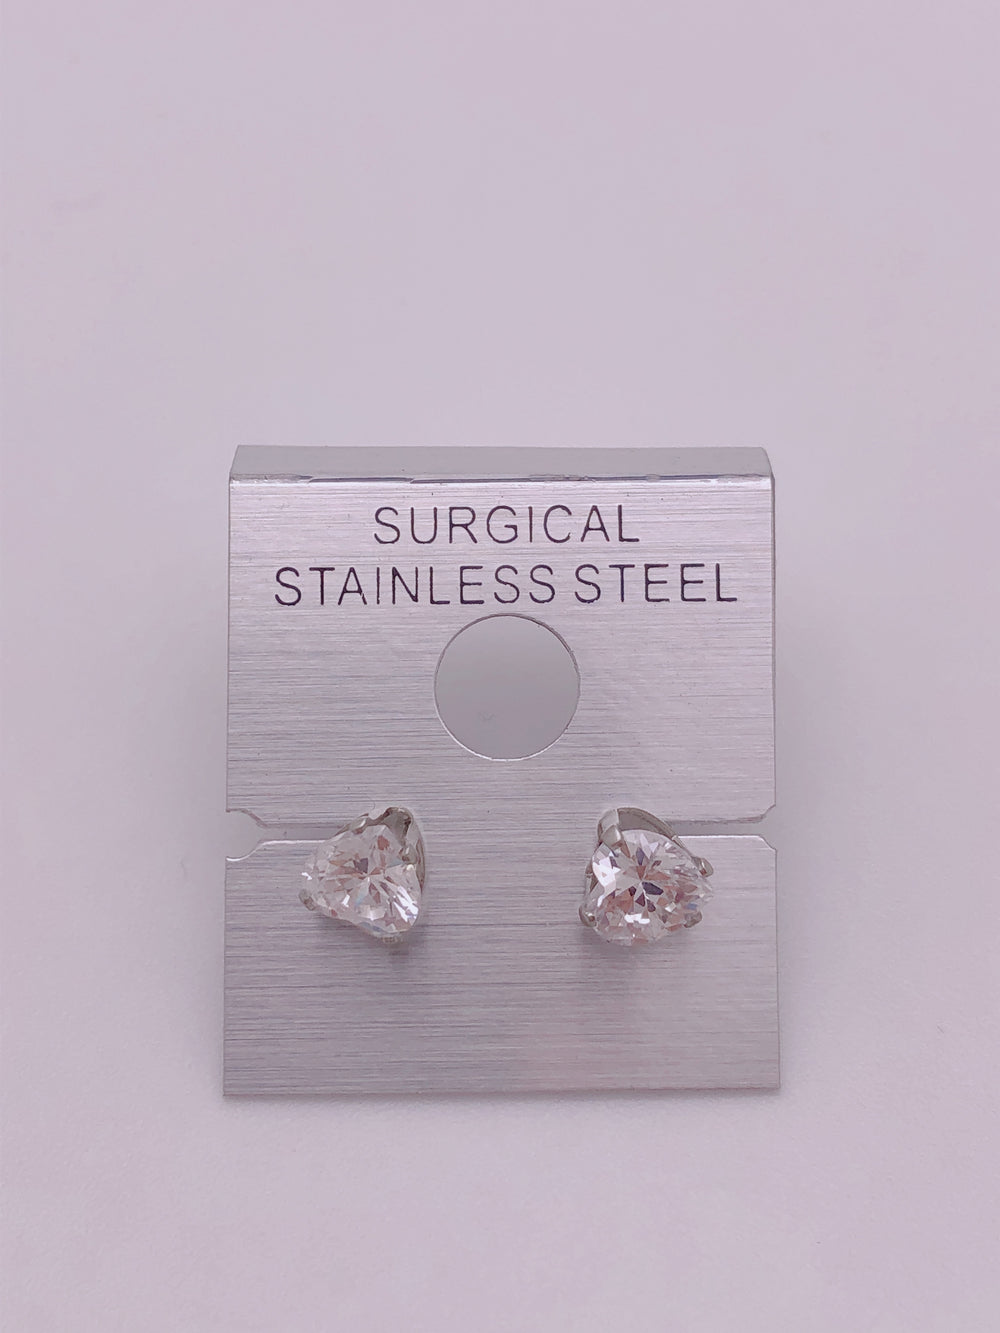 Surgical stainless steel earrings